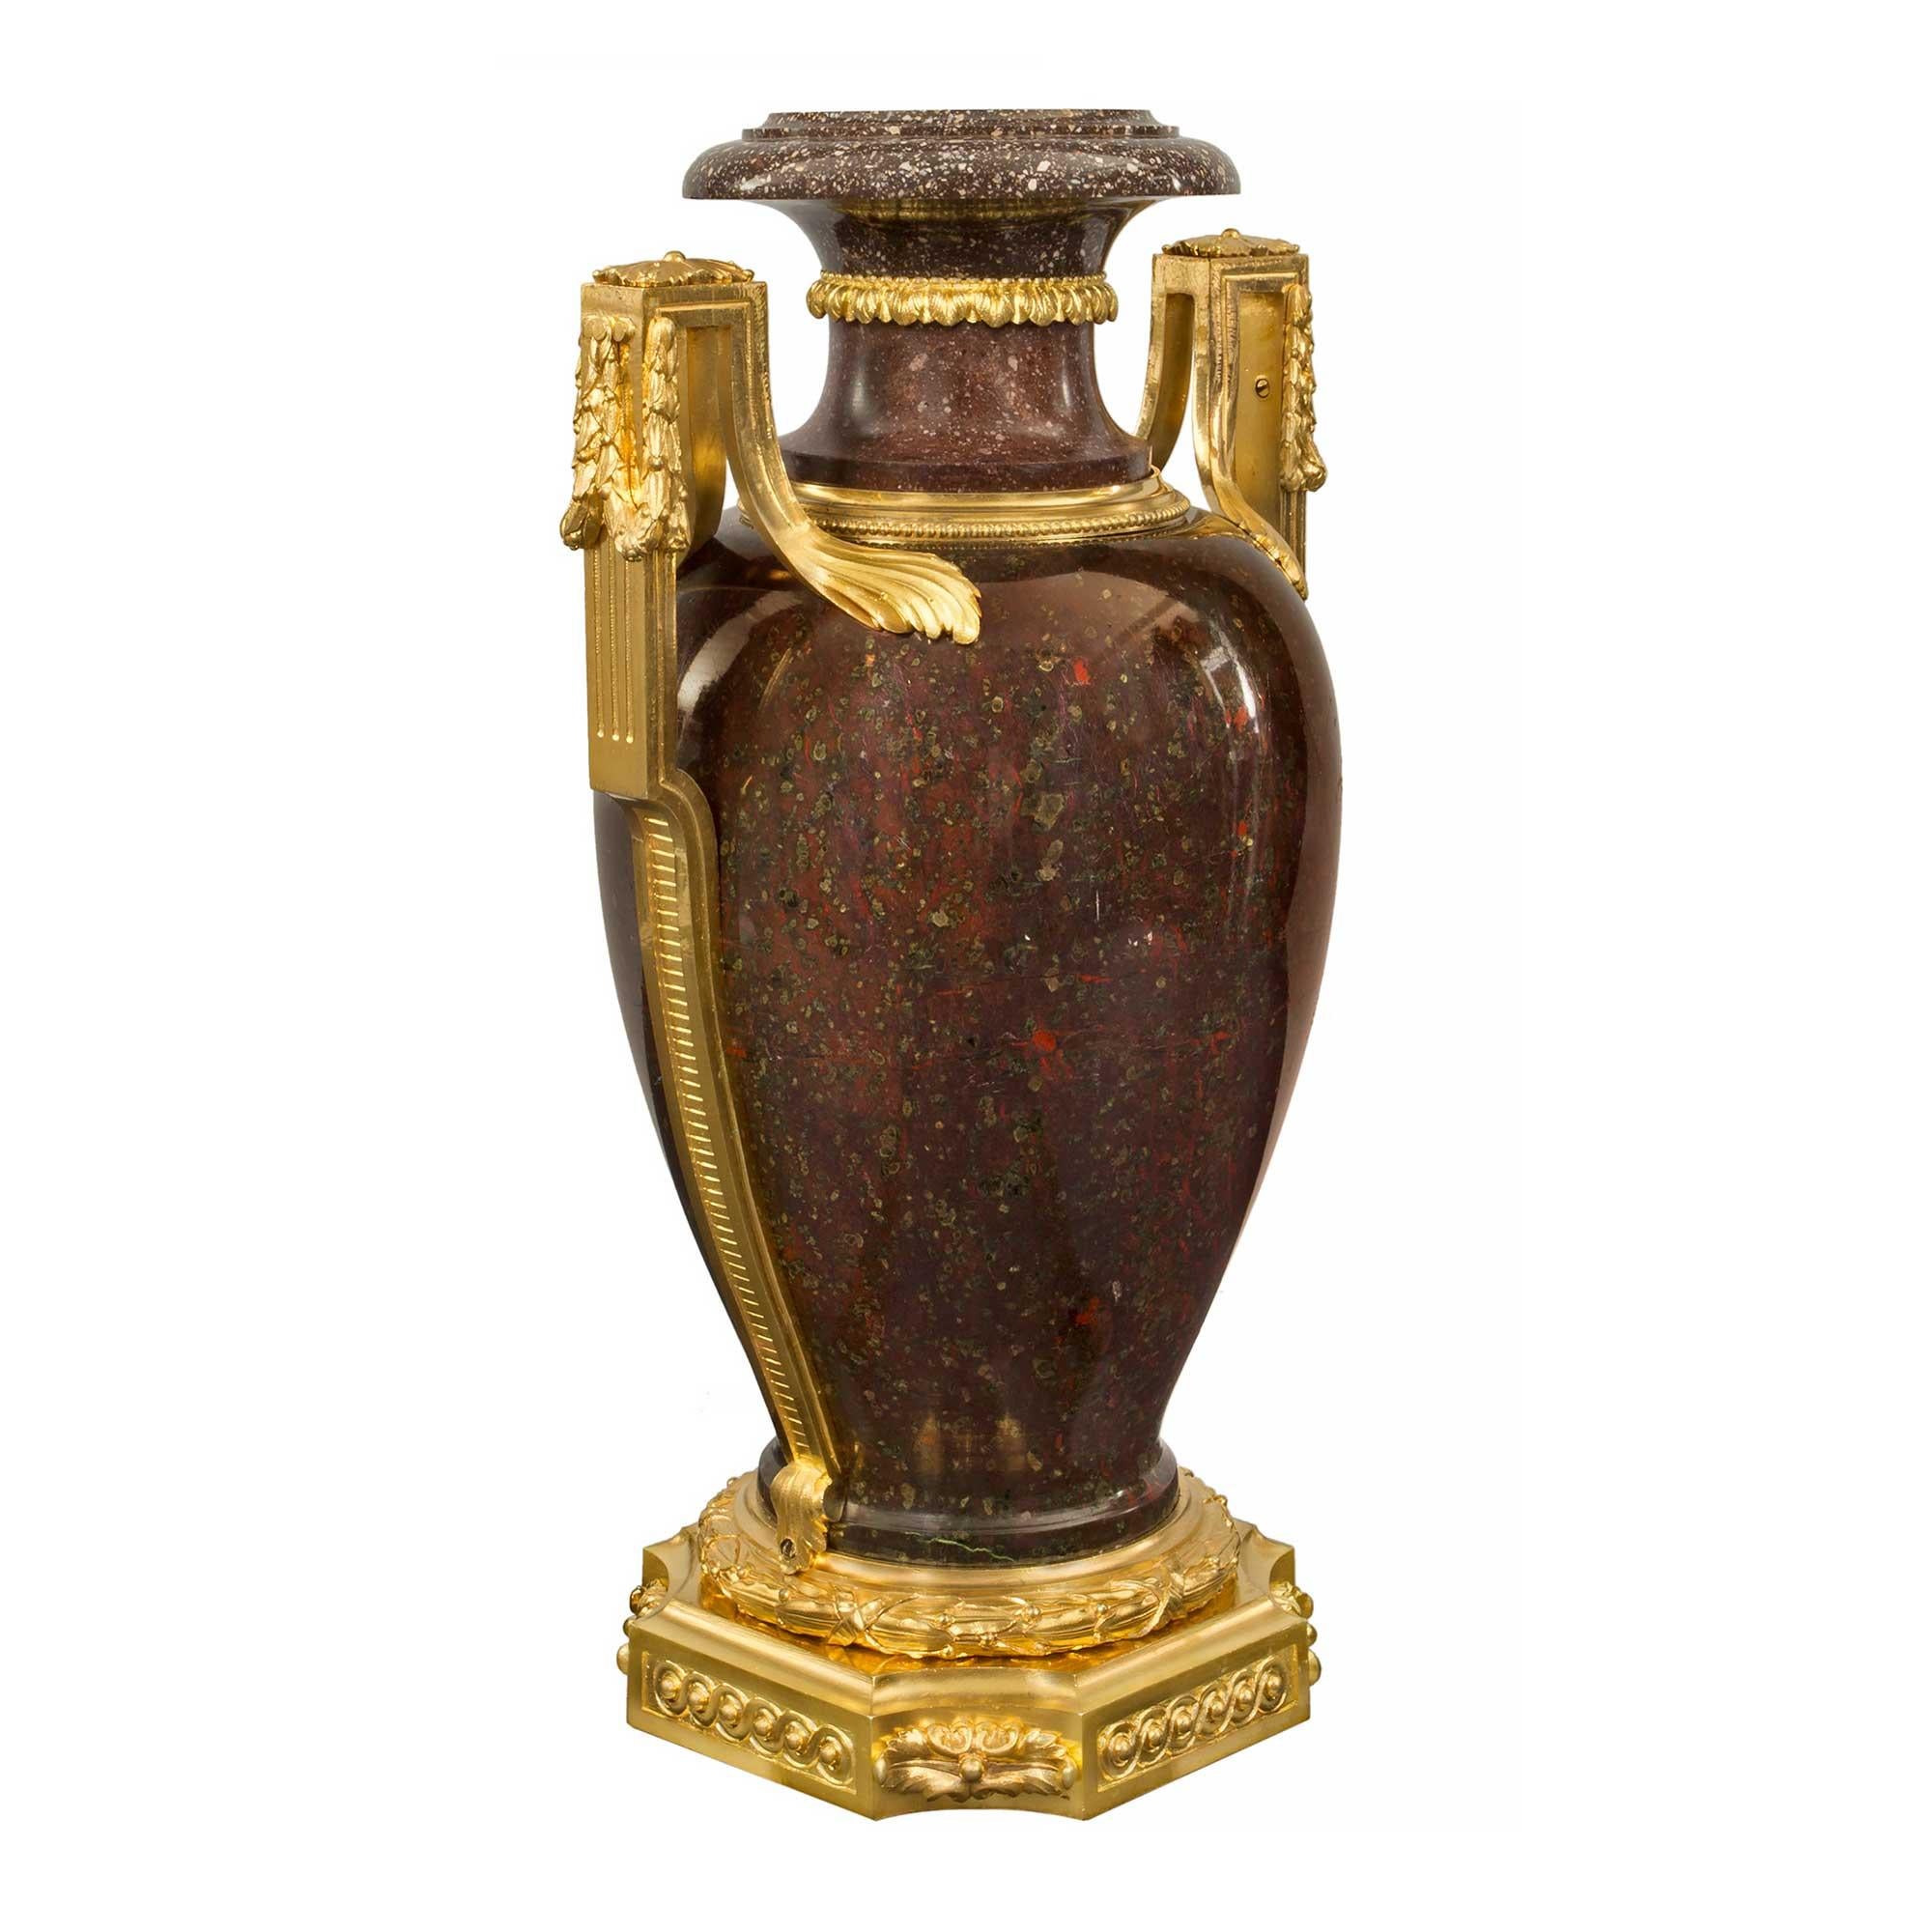 French Early 19th Century Louis XVI Style Porphyry and Ormolu Urns In Good Condition For Sale In West Palm Beach, FL